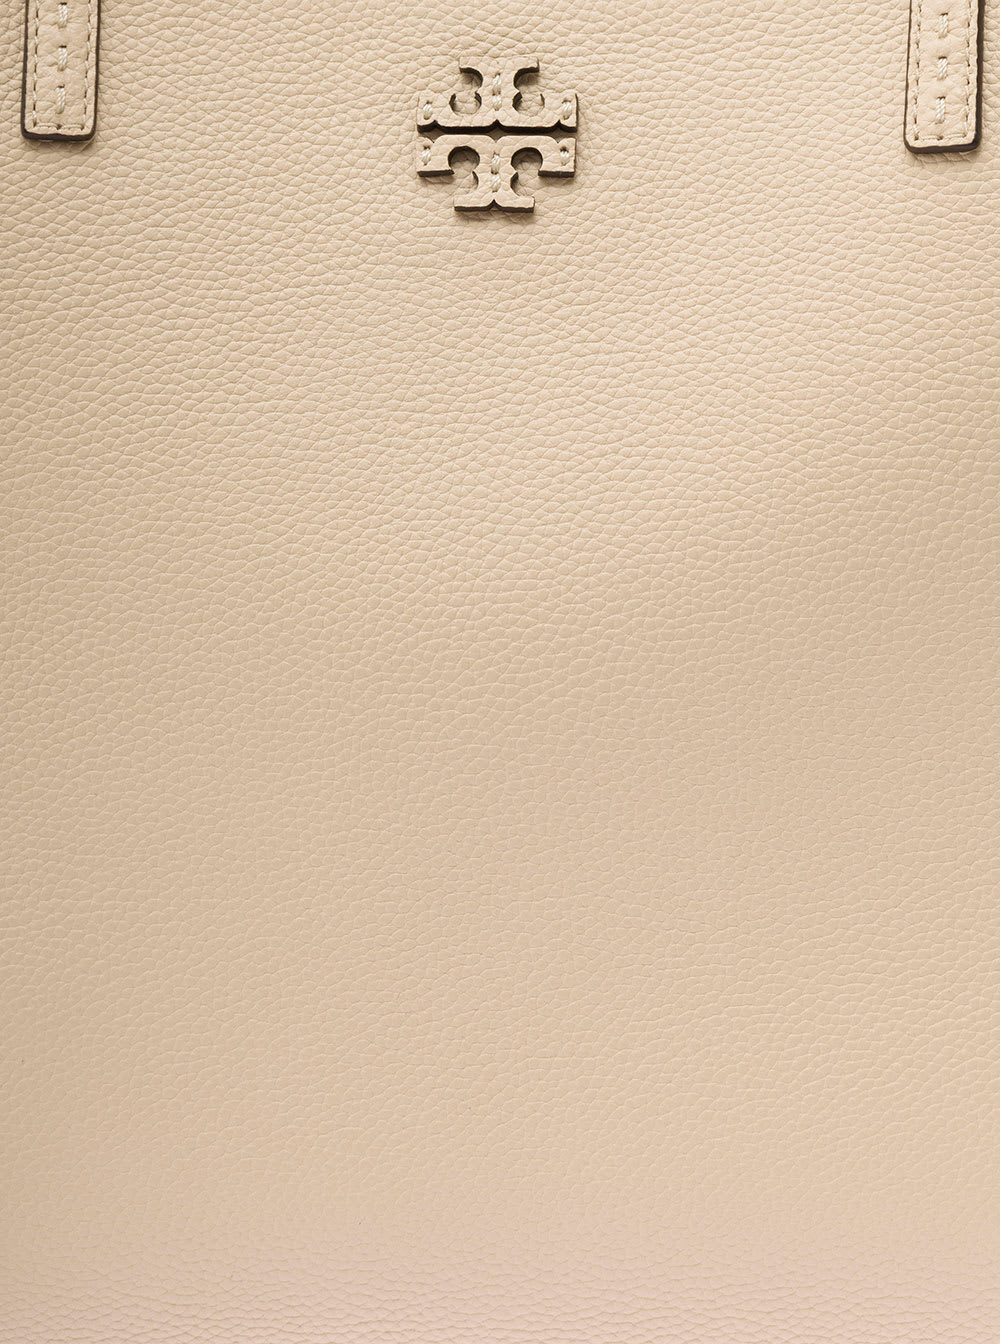 Shop Tory Burch Mcgraw White Tote Bag Wit Double T Detail In Grainy Leather Woman